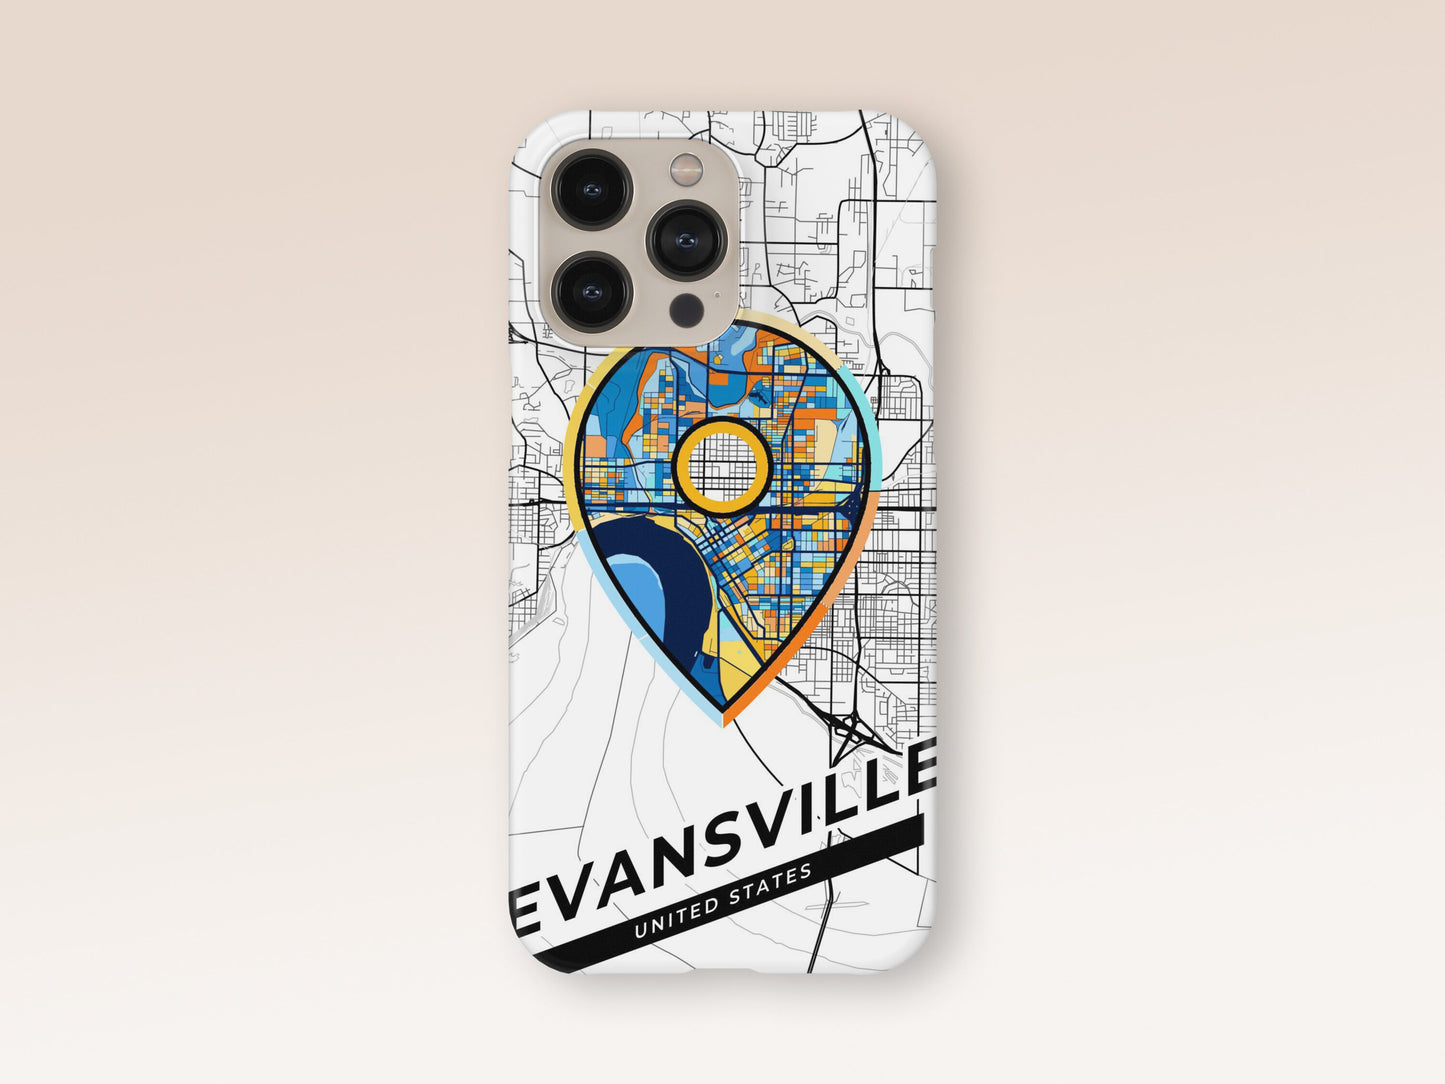 Evansville Indiana slim phone case with colorful icon. Birthday, wedding or housewarming gift. Couple match cases. 1